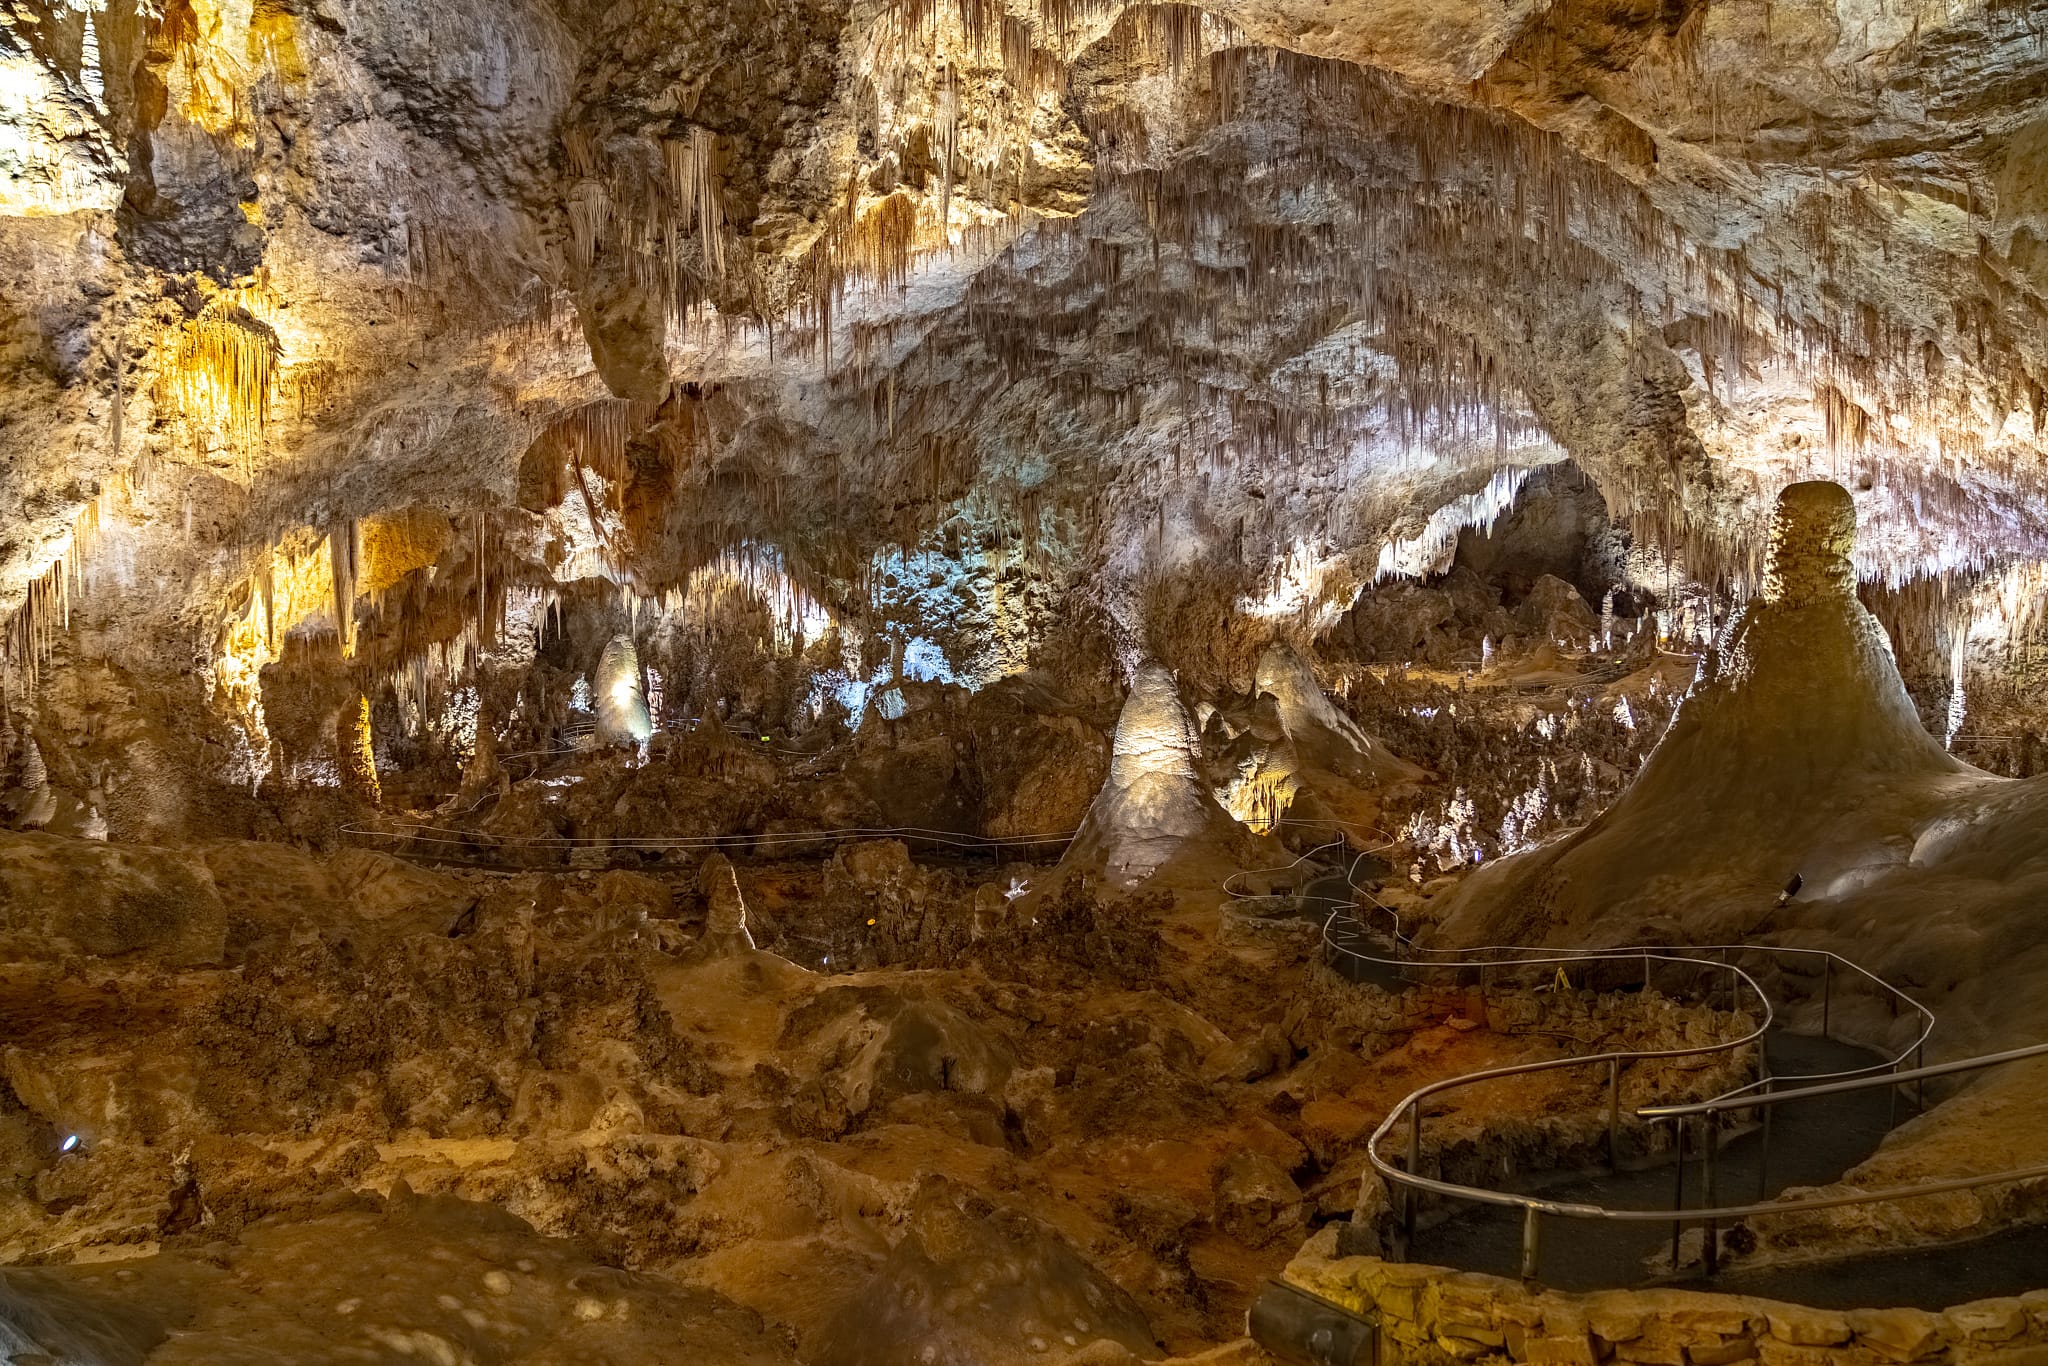 Carlsbad Caverns National Park: World's Most Beautiful Cave?